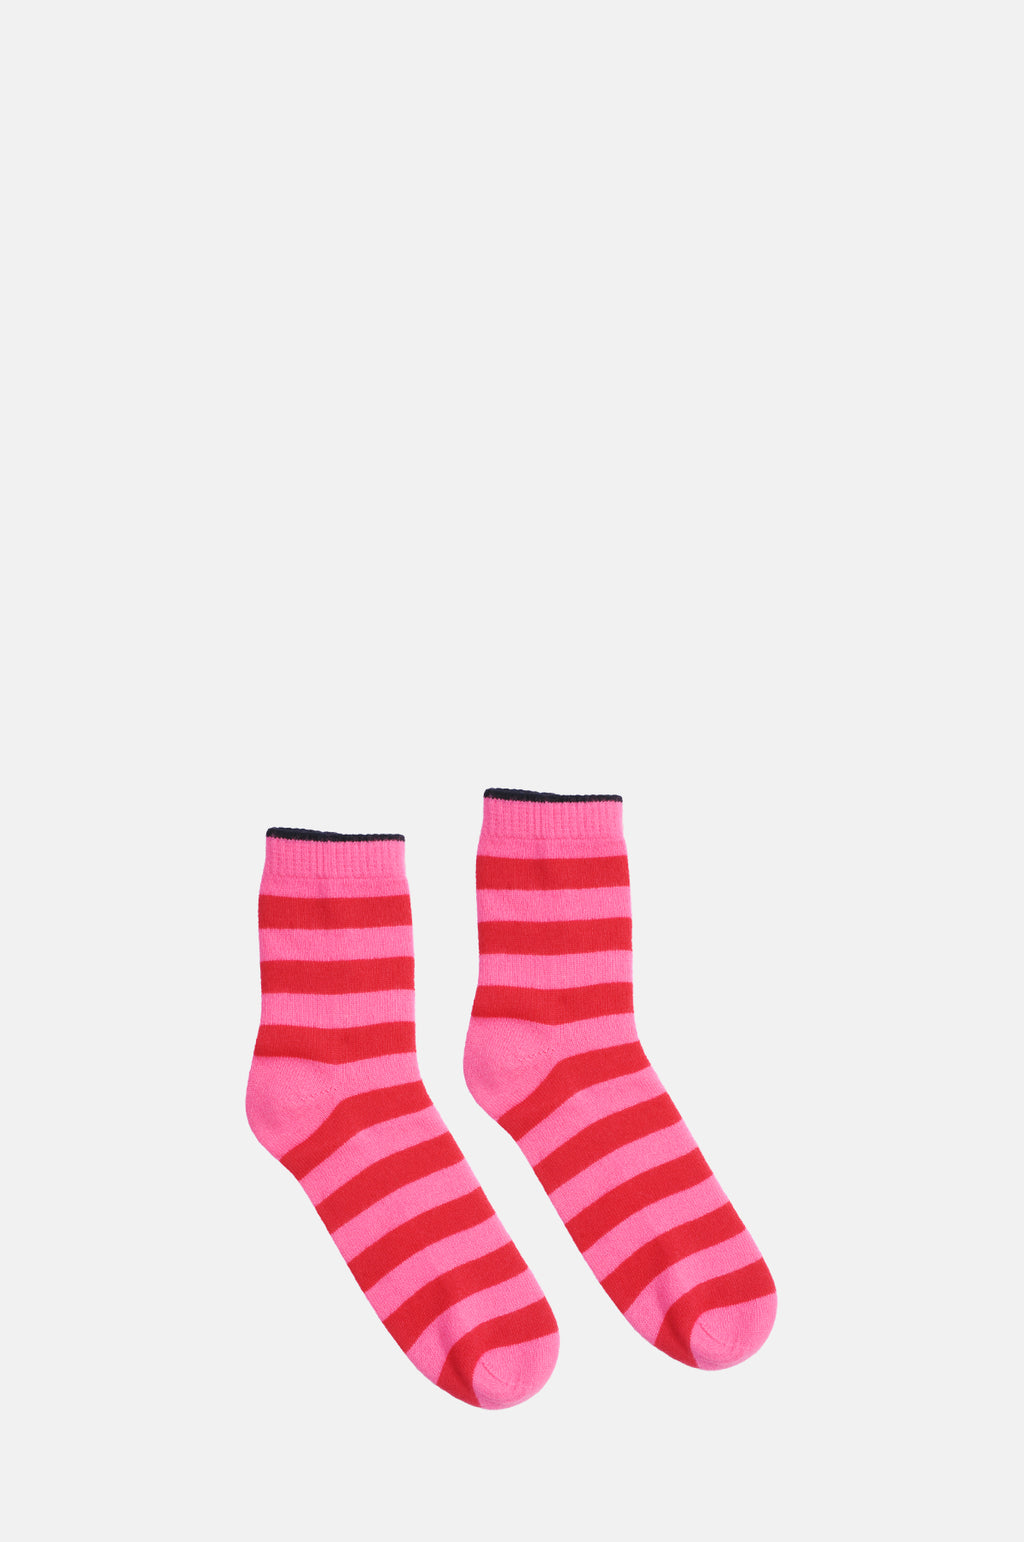 The Jumper 1234 Stripe Socks in Hot Pink and Cherry red.